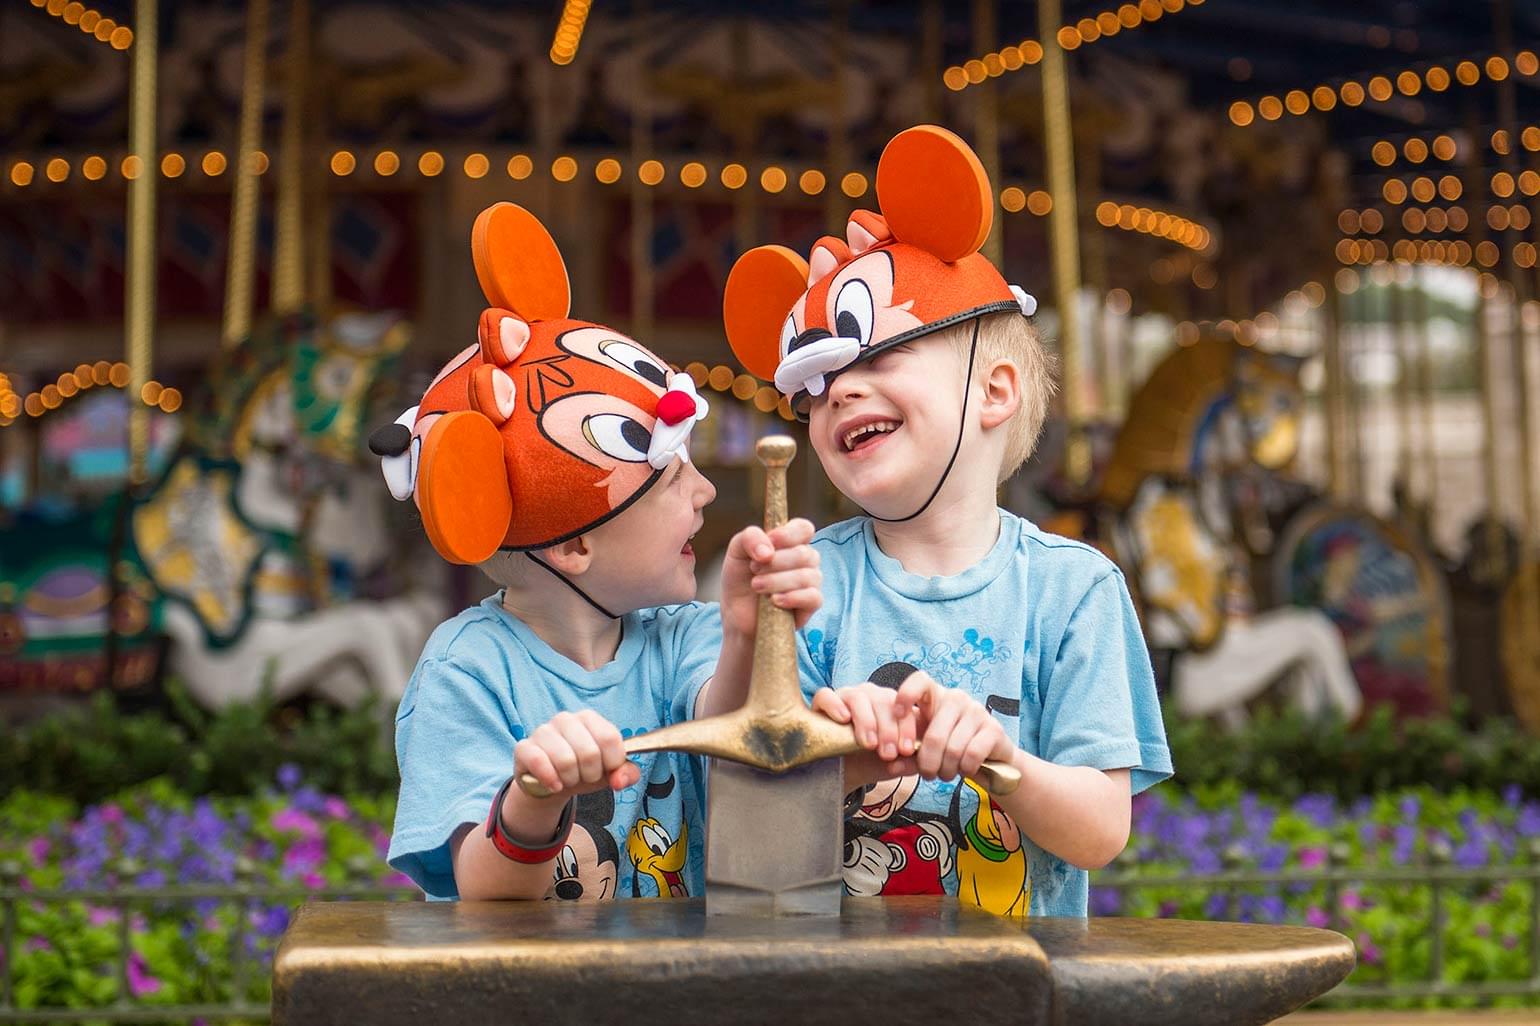 Two young brothers laugh while trying to pull out the sword in the stone at the Magic Kingdom.